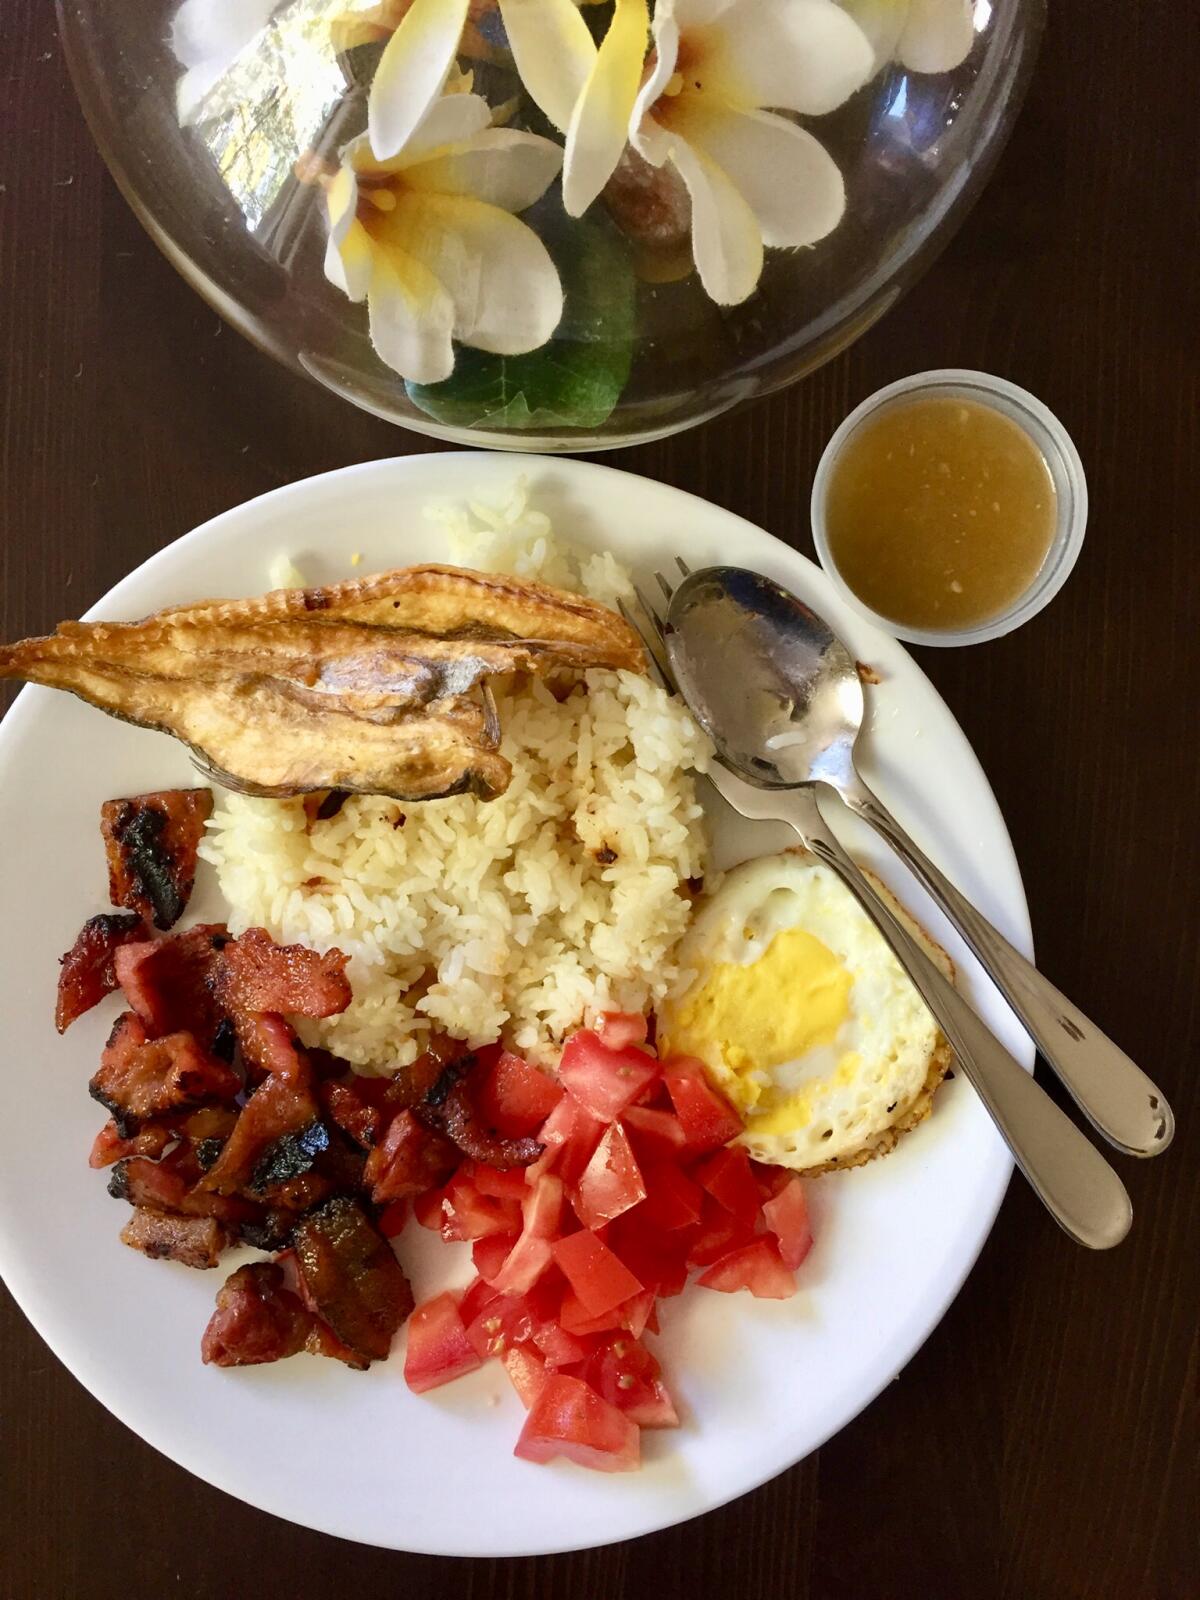 Grill City’s silog is a Filipino breakfast with fried rice, a fried egg and a protein of your choice.